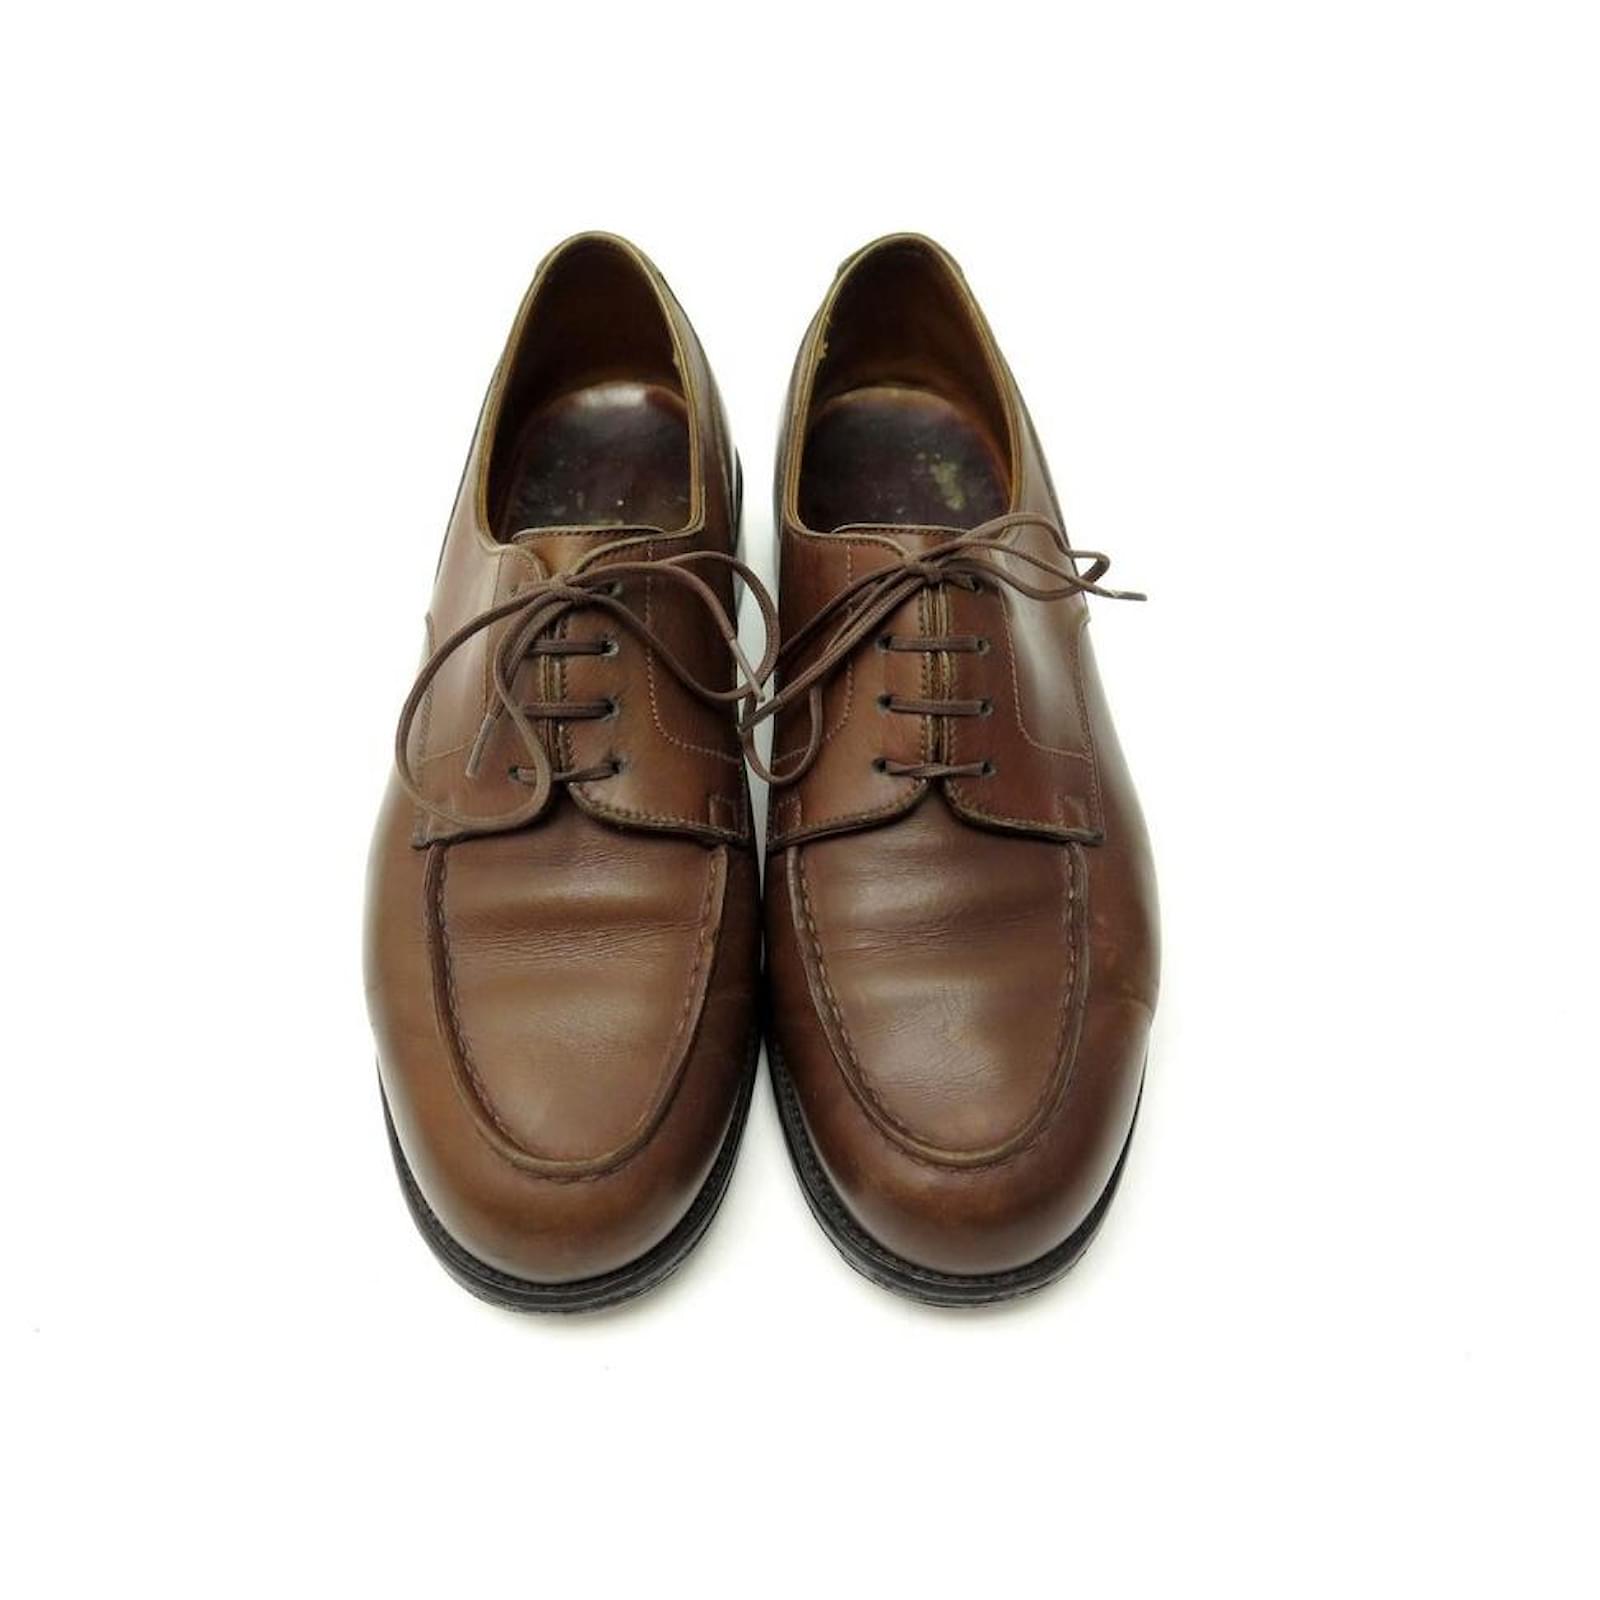 JM WESTON LE GOLF SHOES 641 4C 37 BROWN LEATHER DERBY + SLEEVES ref ...